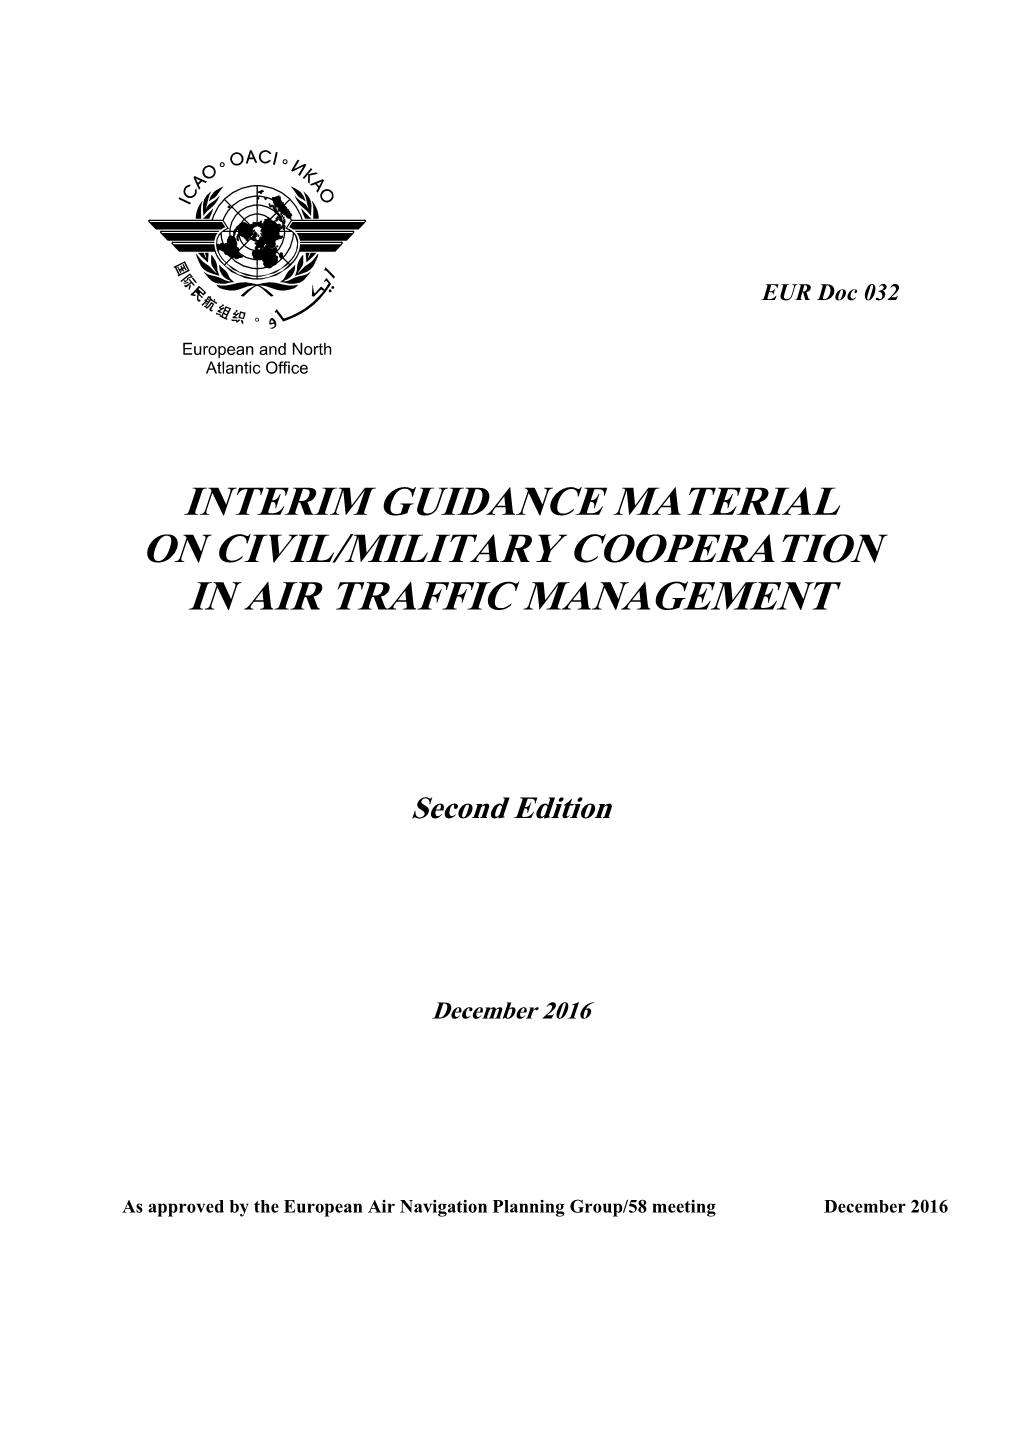 Interim Guidance Material on Civil/Military Cooperation in Air Traffic Management